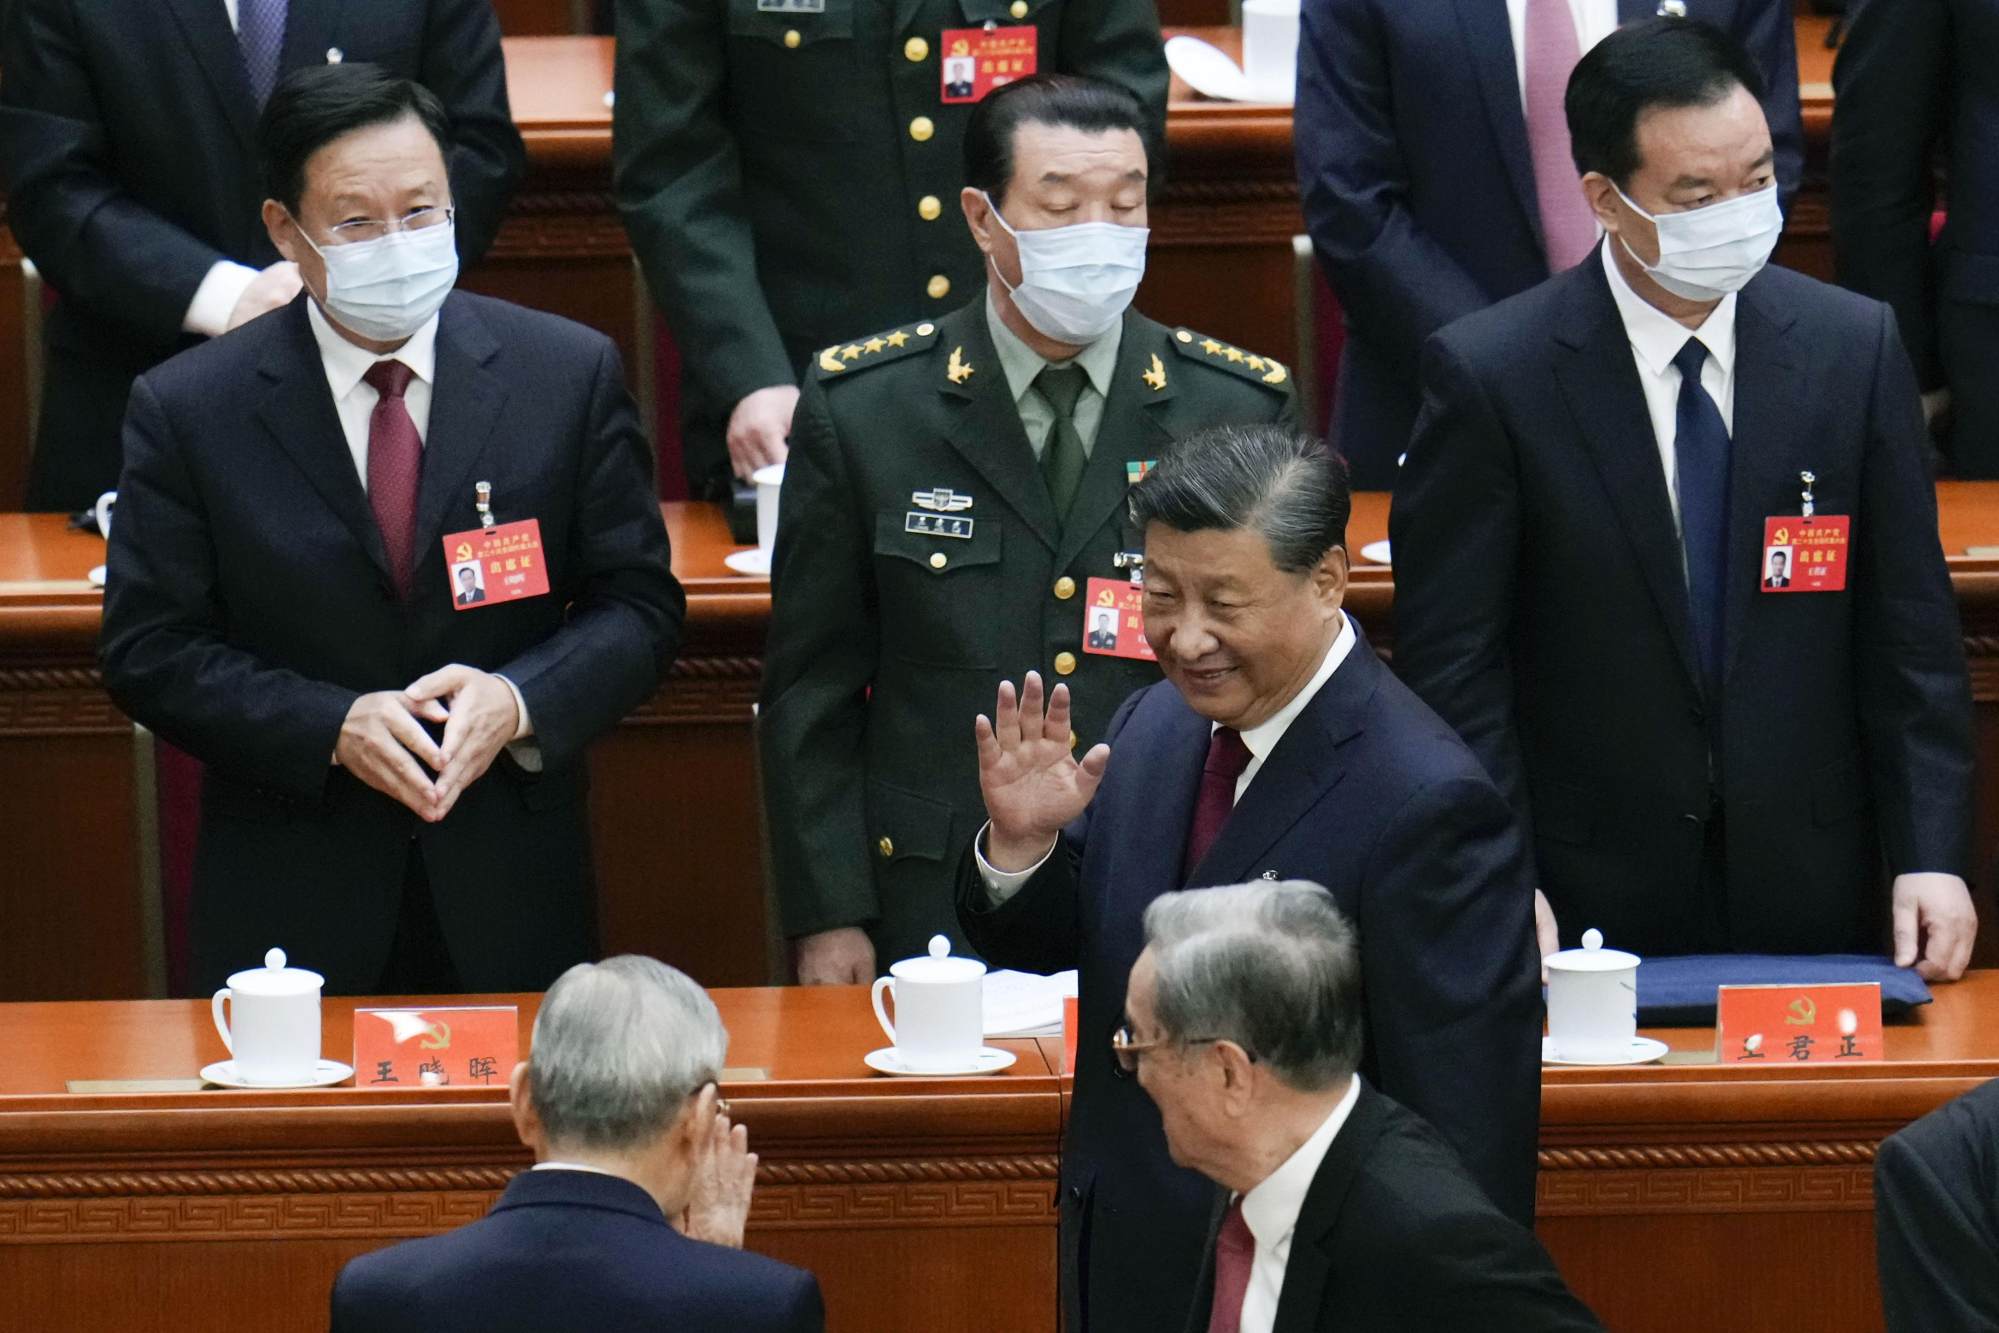 President Xi Jinping waves to delegates at the Great Hall of the People in Beijing on the first day of the 20th party congress. Photo: Kyodo